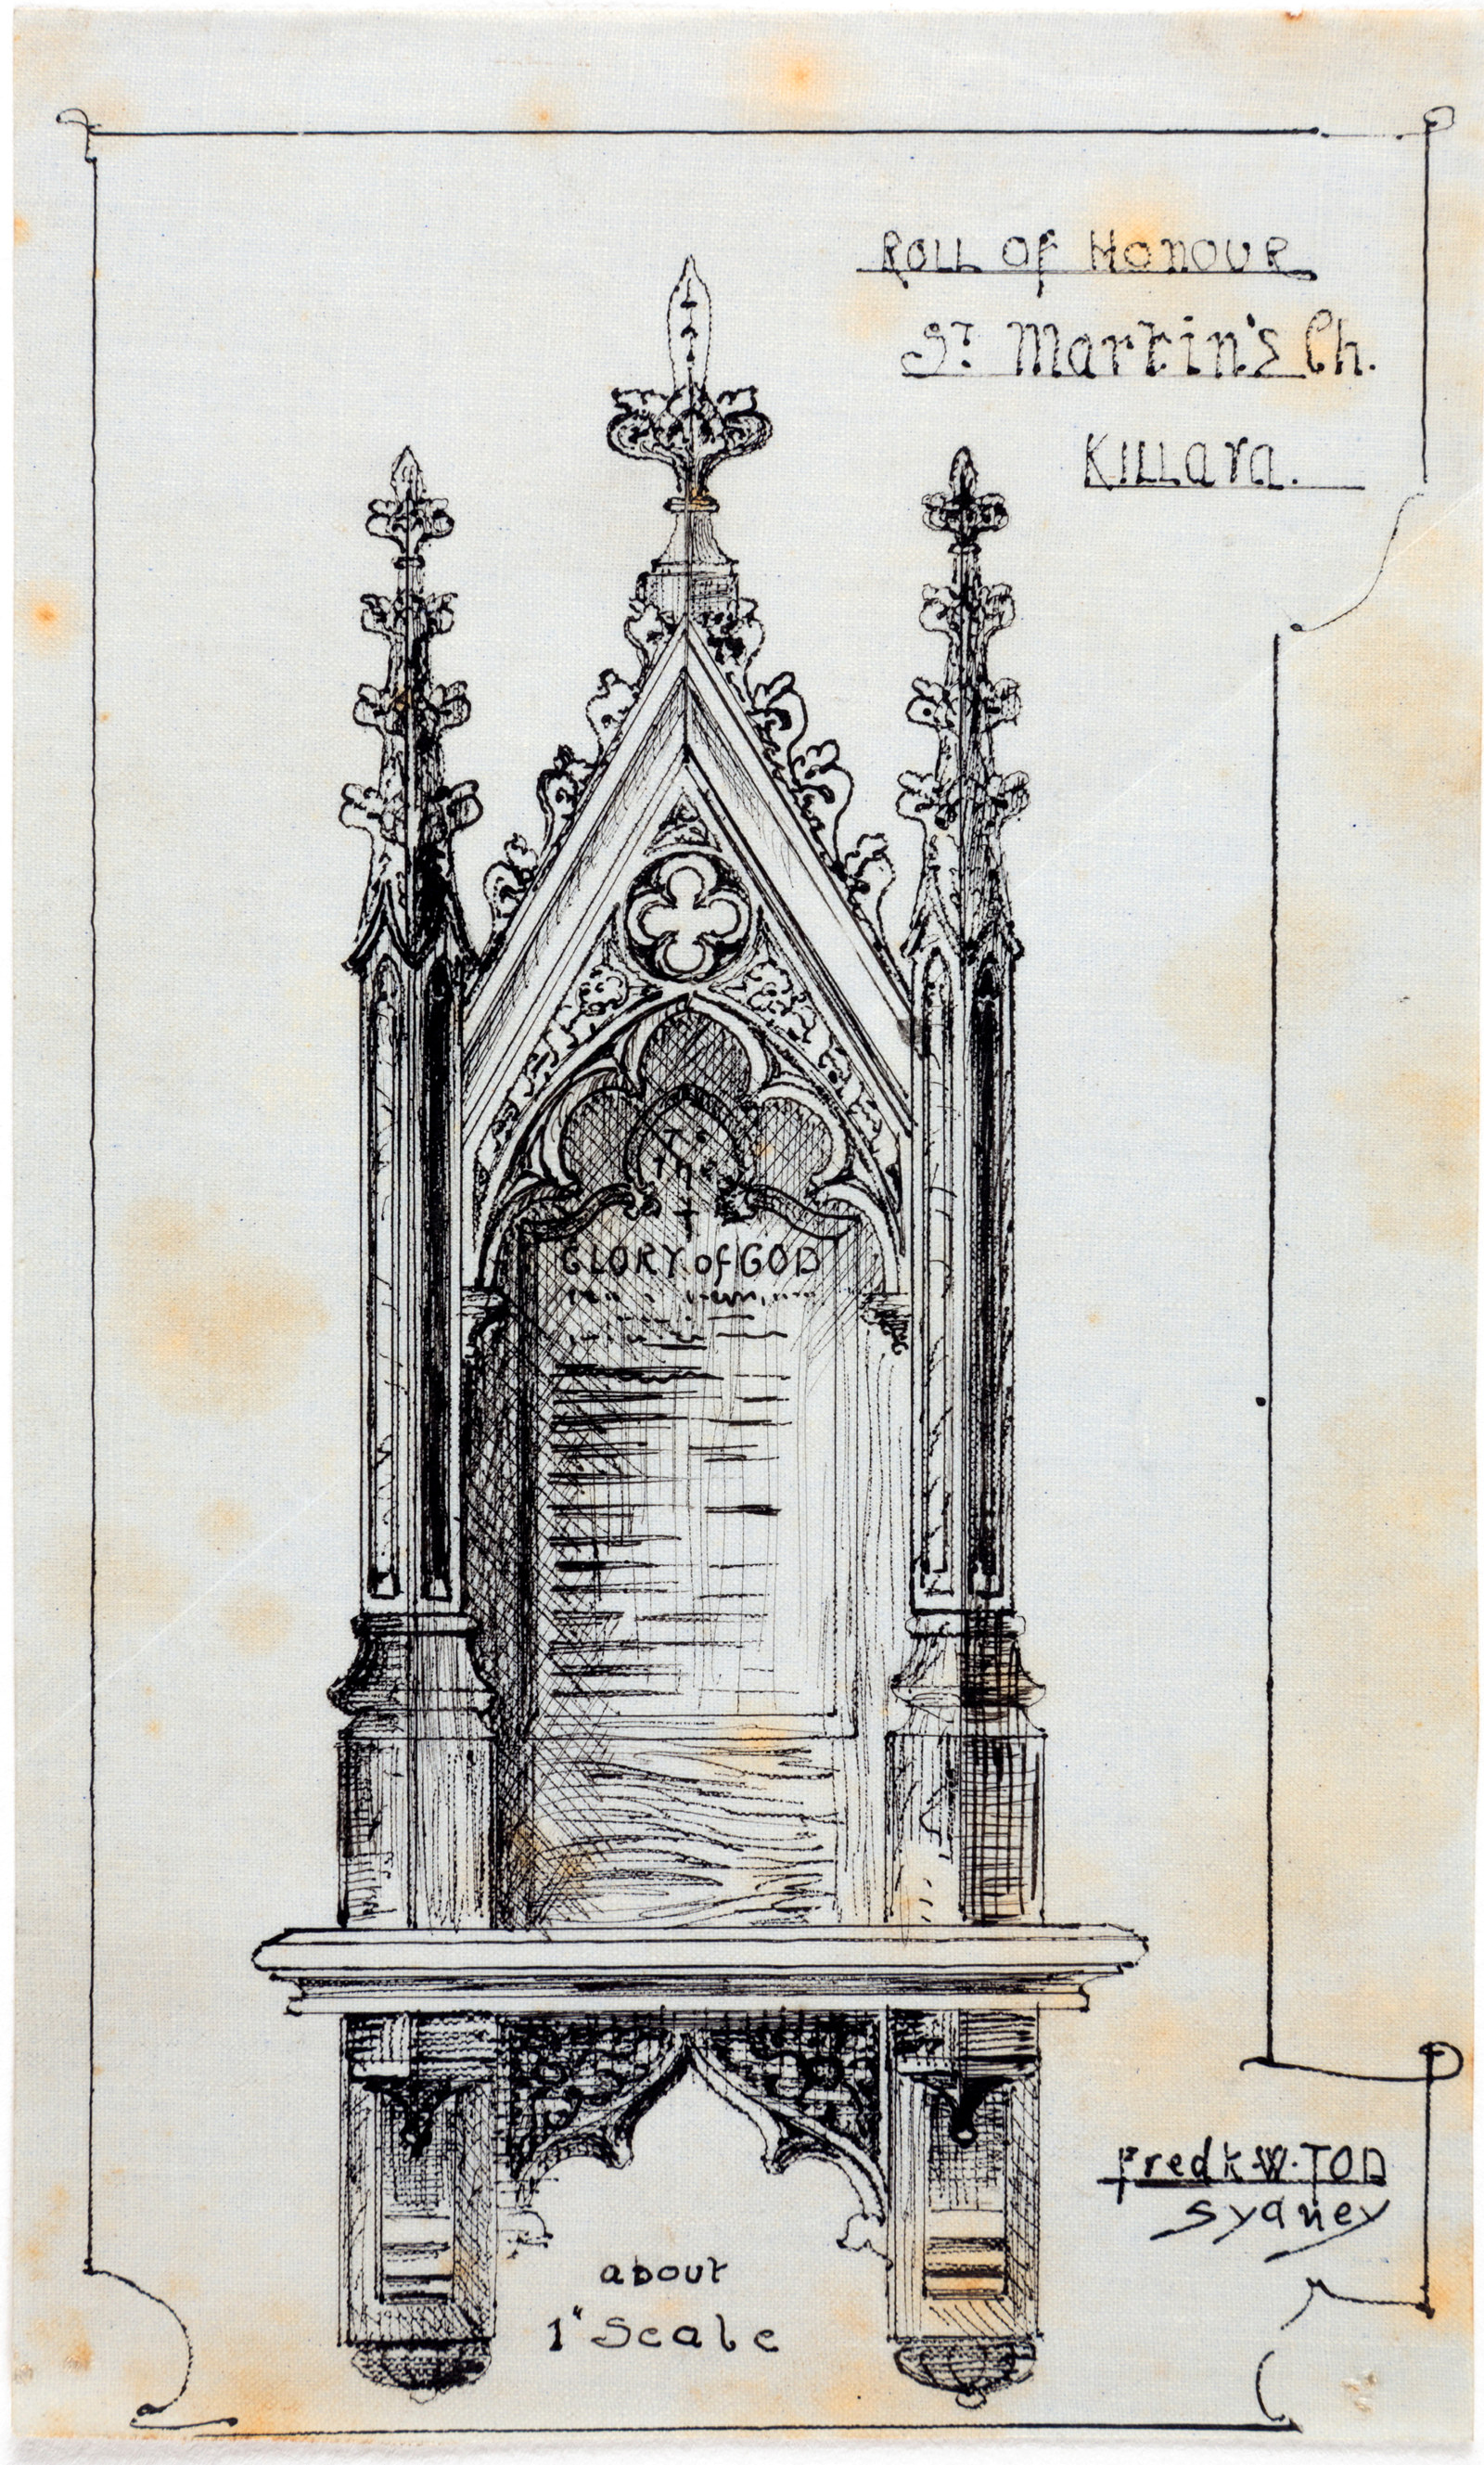 Design for Roll of Honour for St Martin's Church Killara by F.W. Tod & Co.